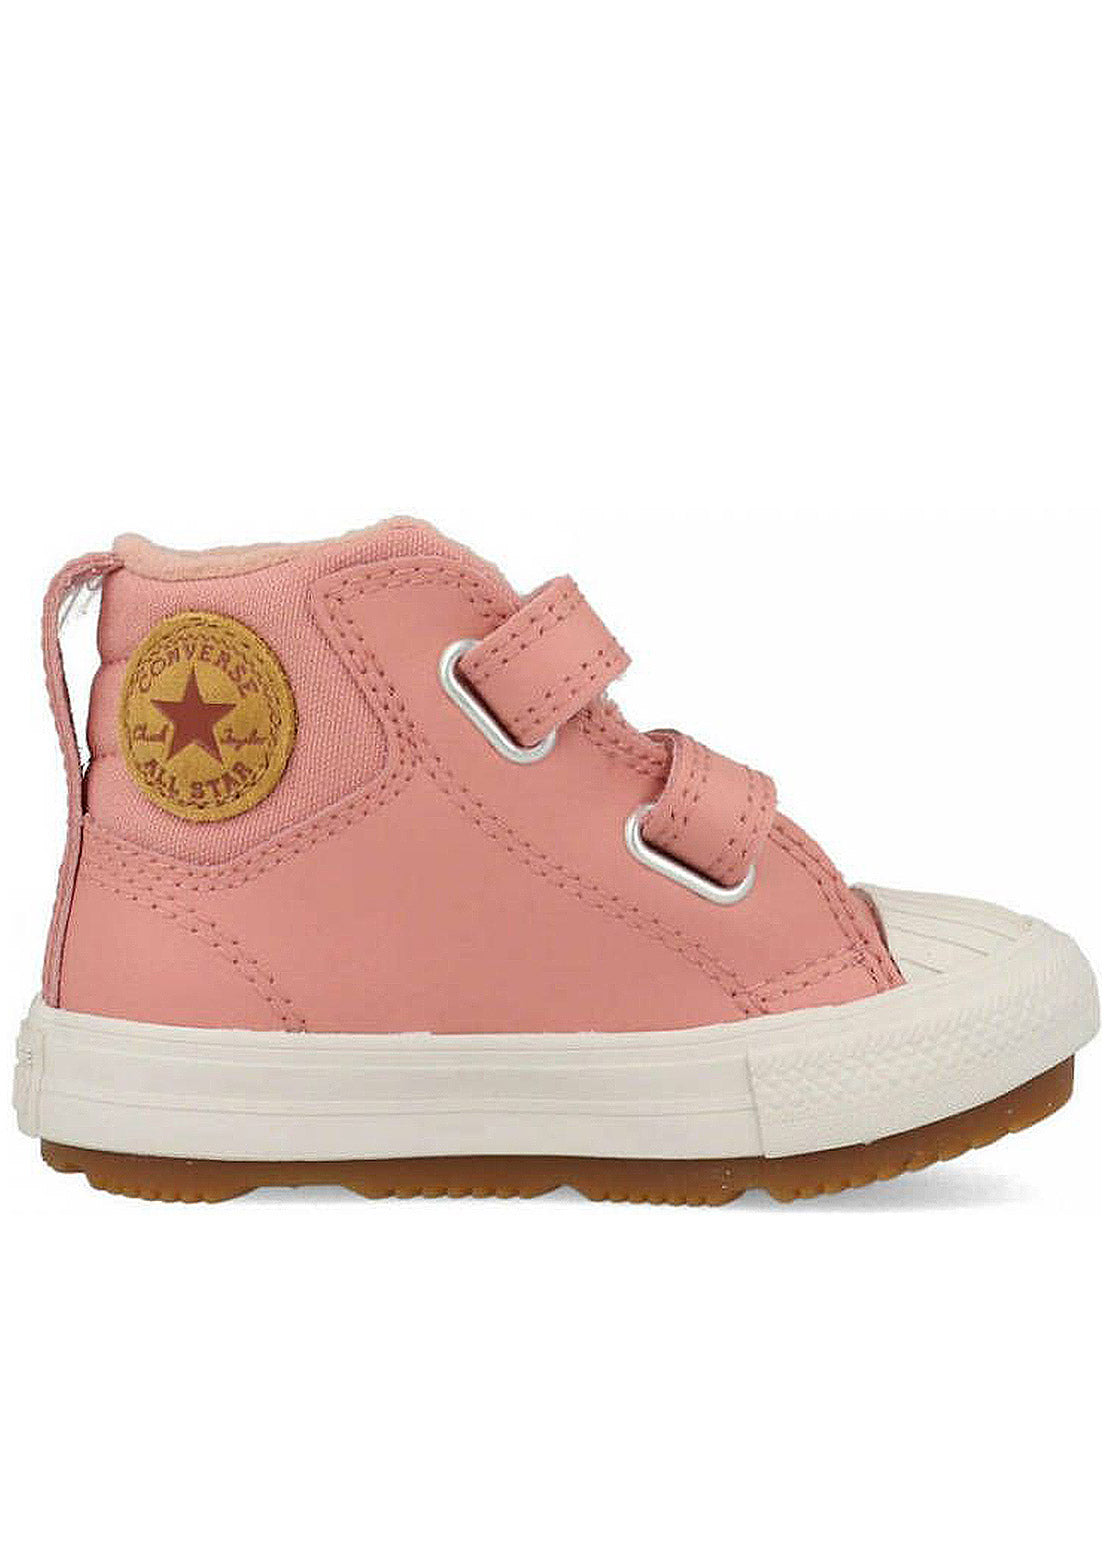 Converse Toddler Chuck Taylor All Star Berkshire Boots Rust Pink/Rust Pink/Pale Putty